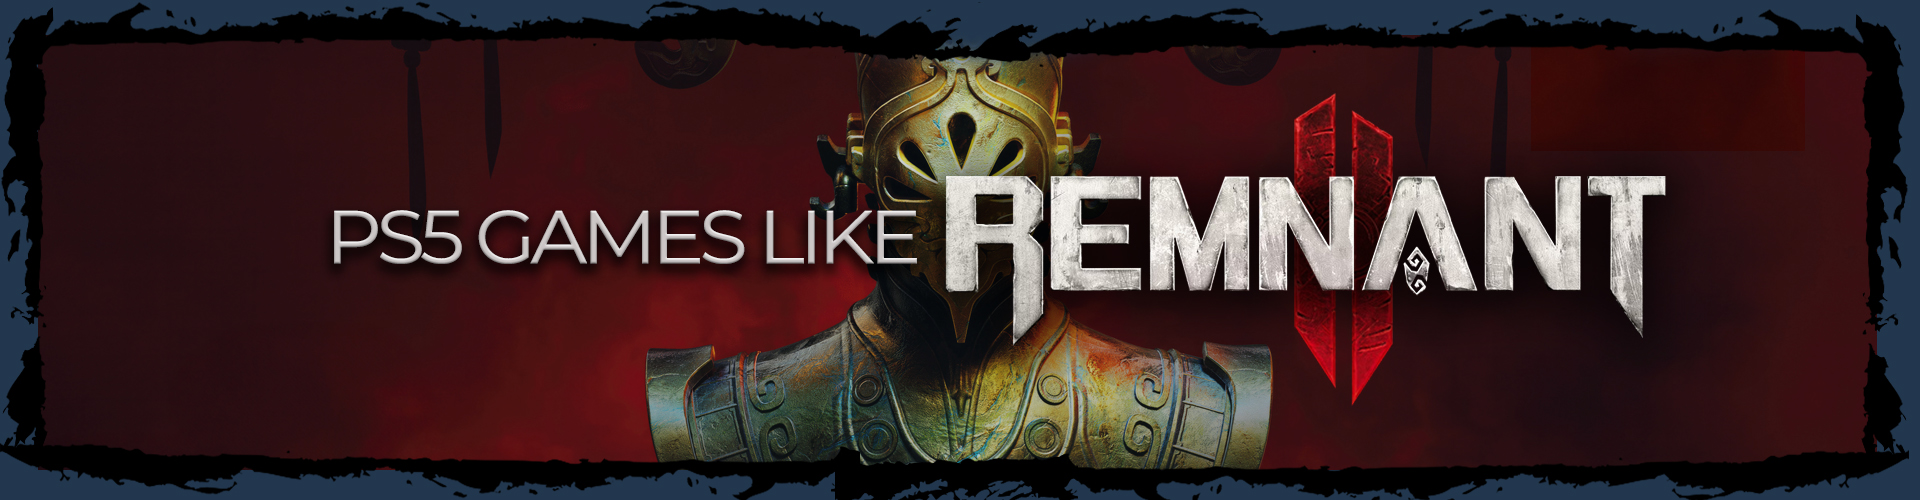 PS5 Games Like Remnant 2